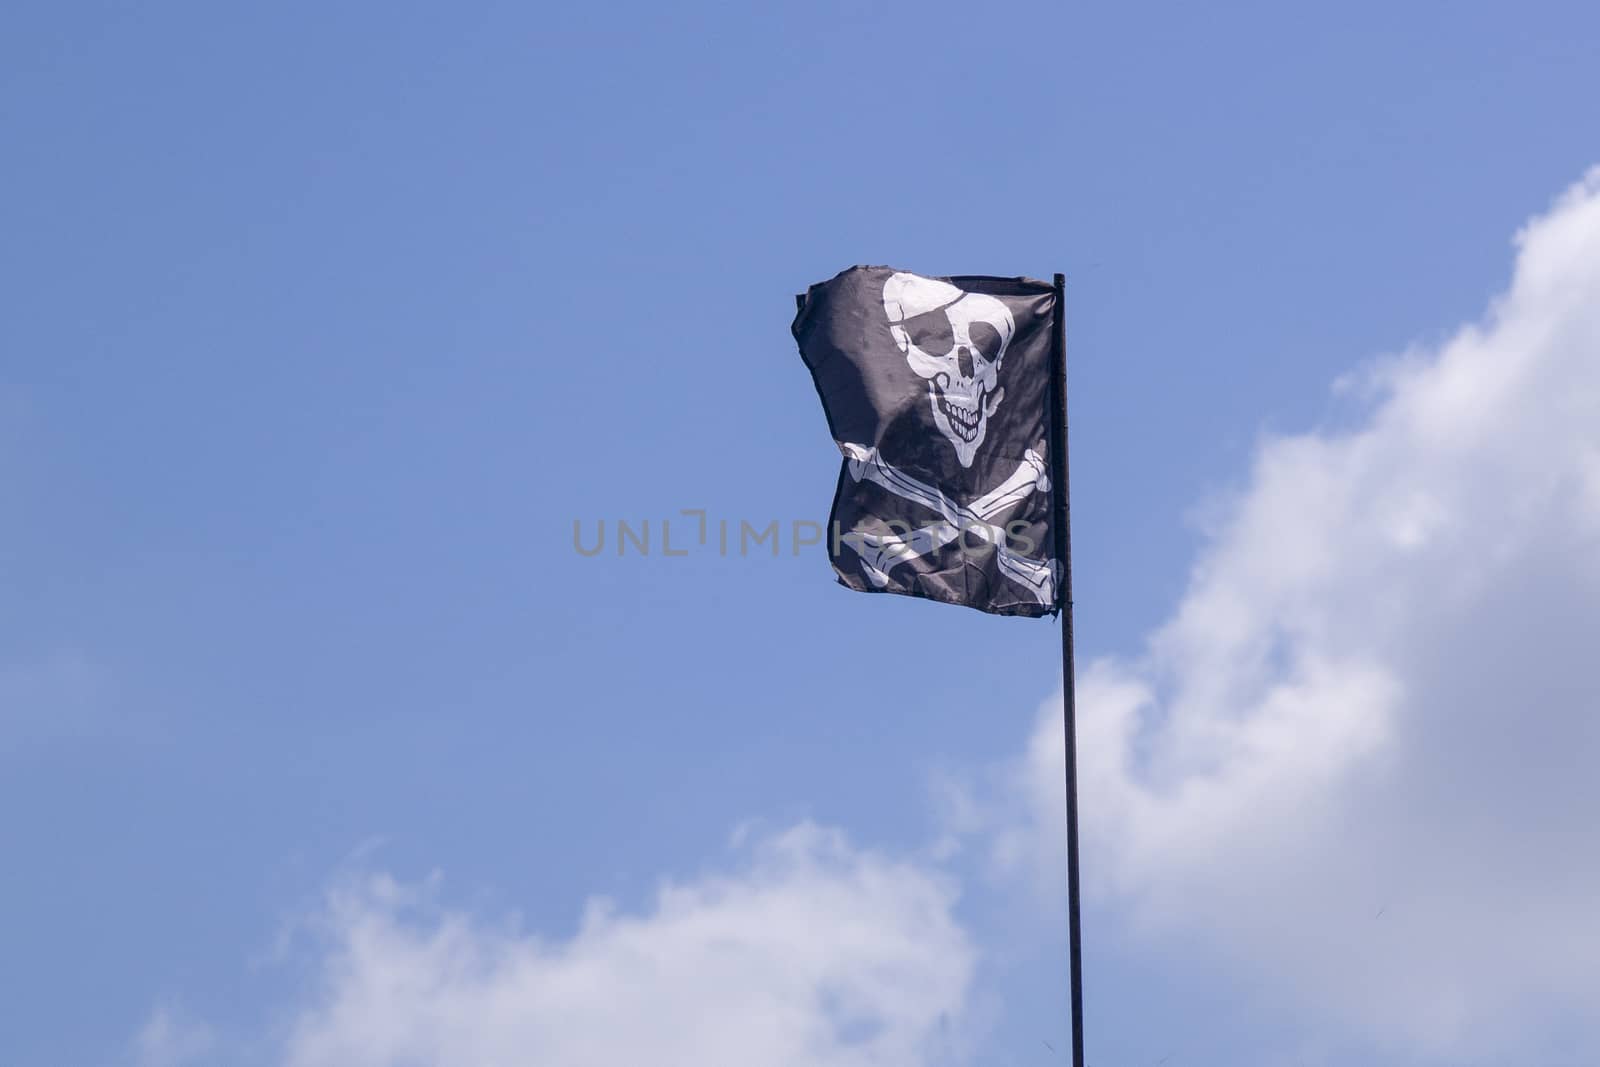 pirate flag develops in the wind, skull with bones, Jolly Roger,the symbol of the robbery